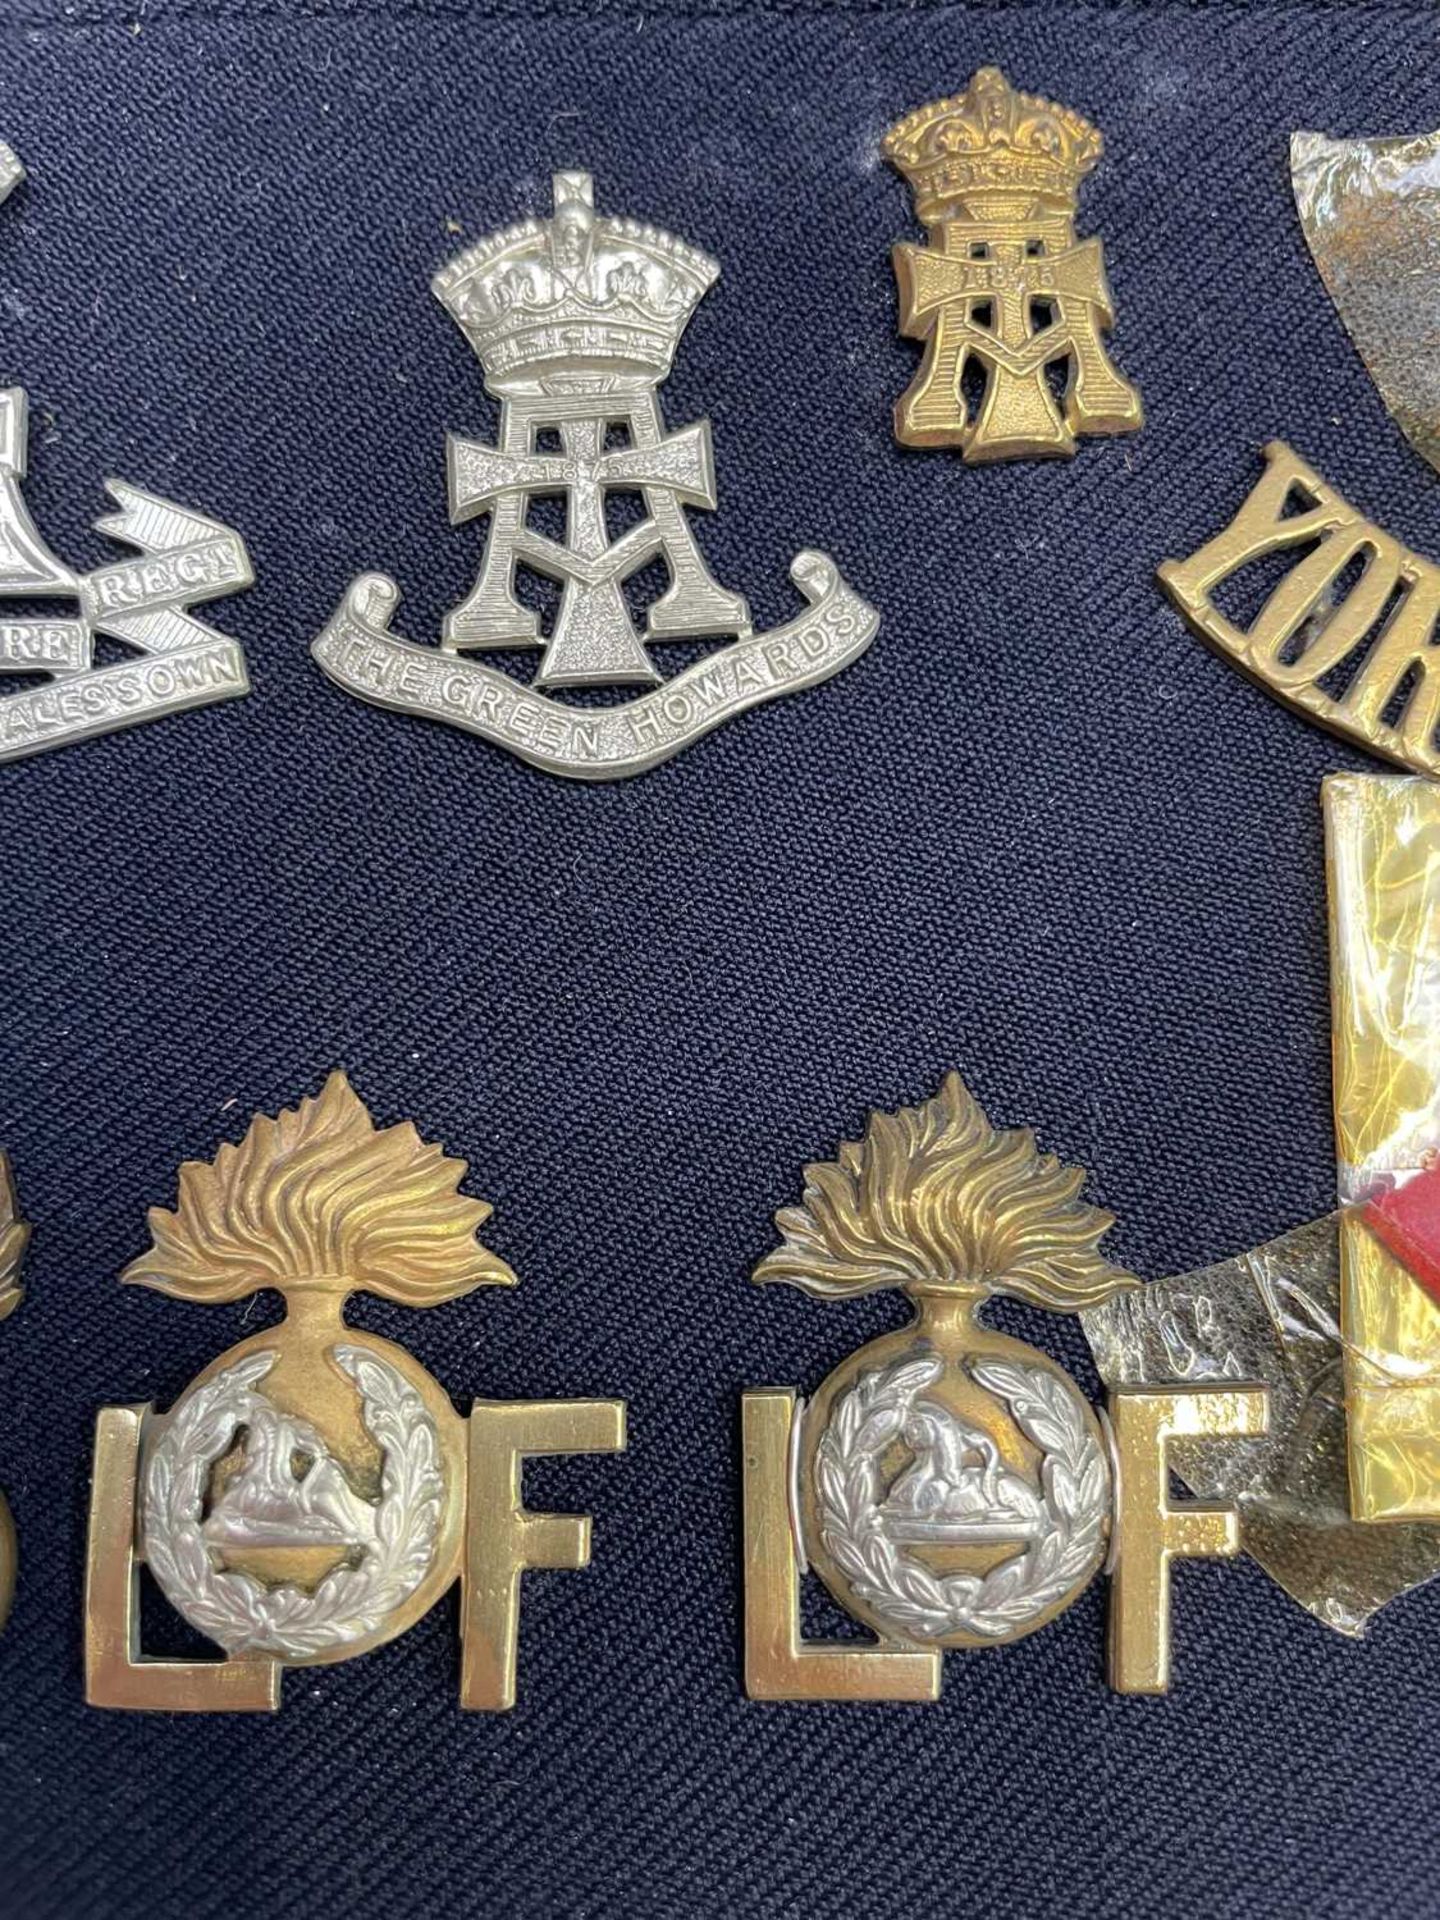 16th - 18th Foot. A display card containing cap badges, collar dogs, shoulder titles and buttons. - Image 4 of 8